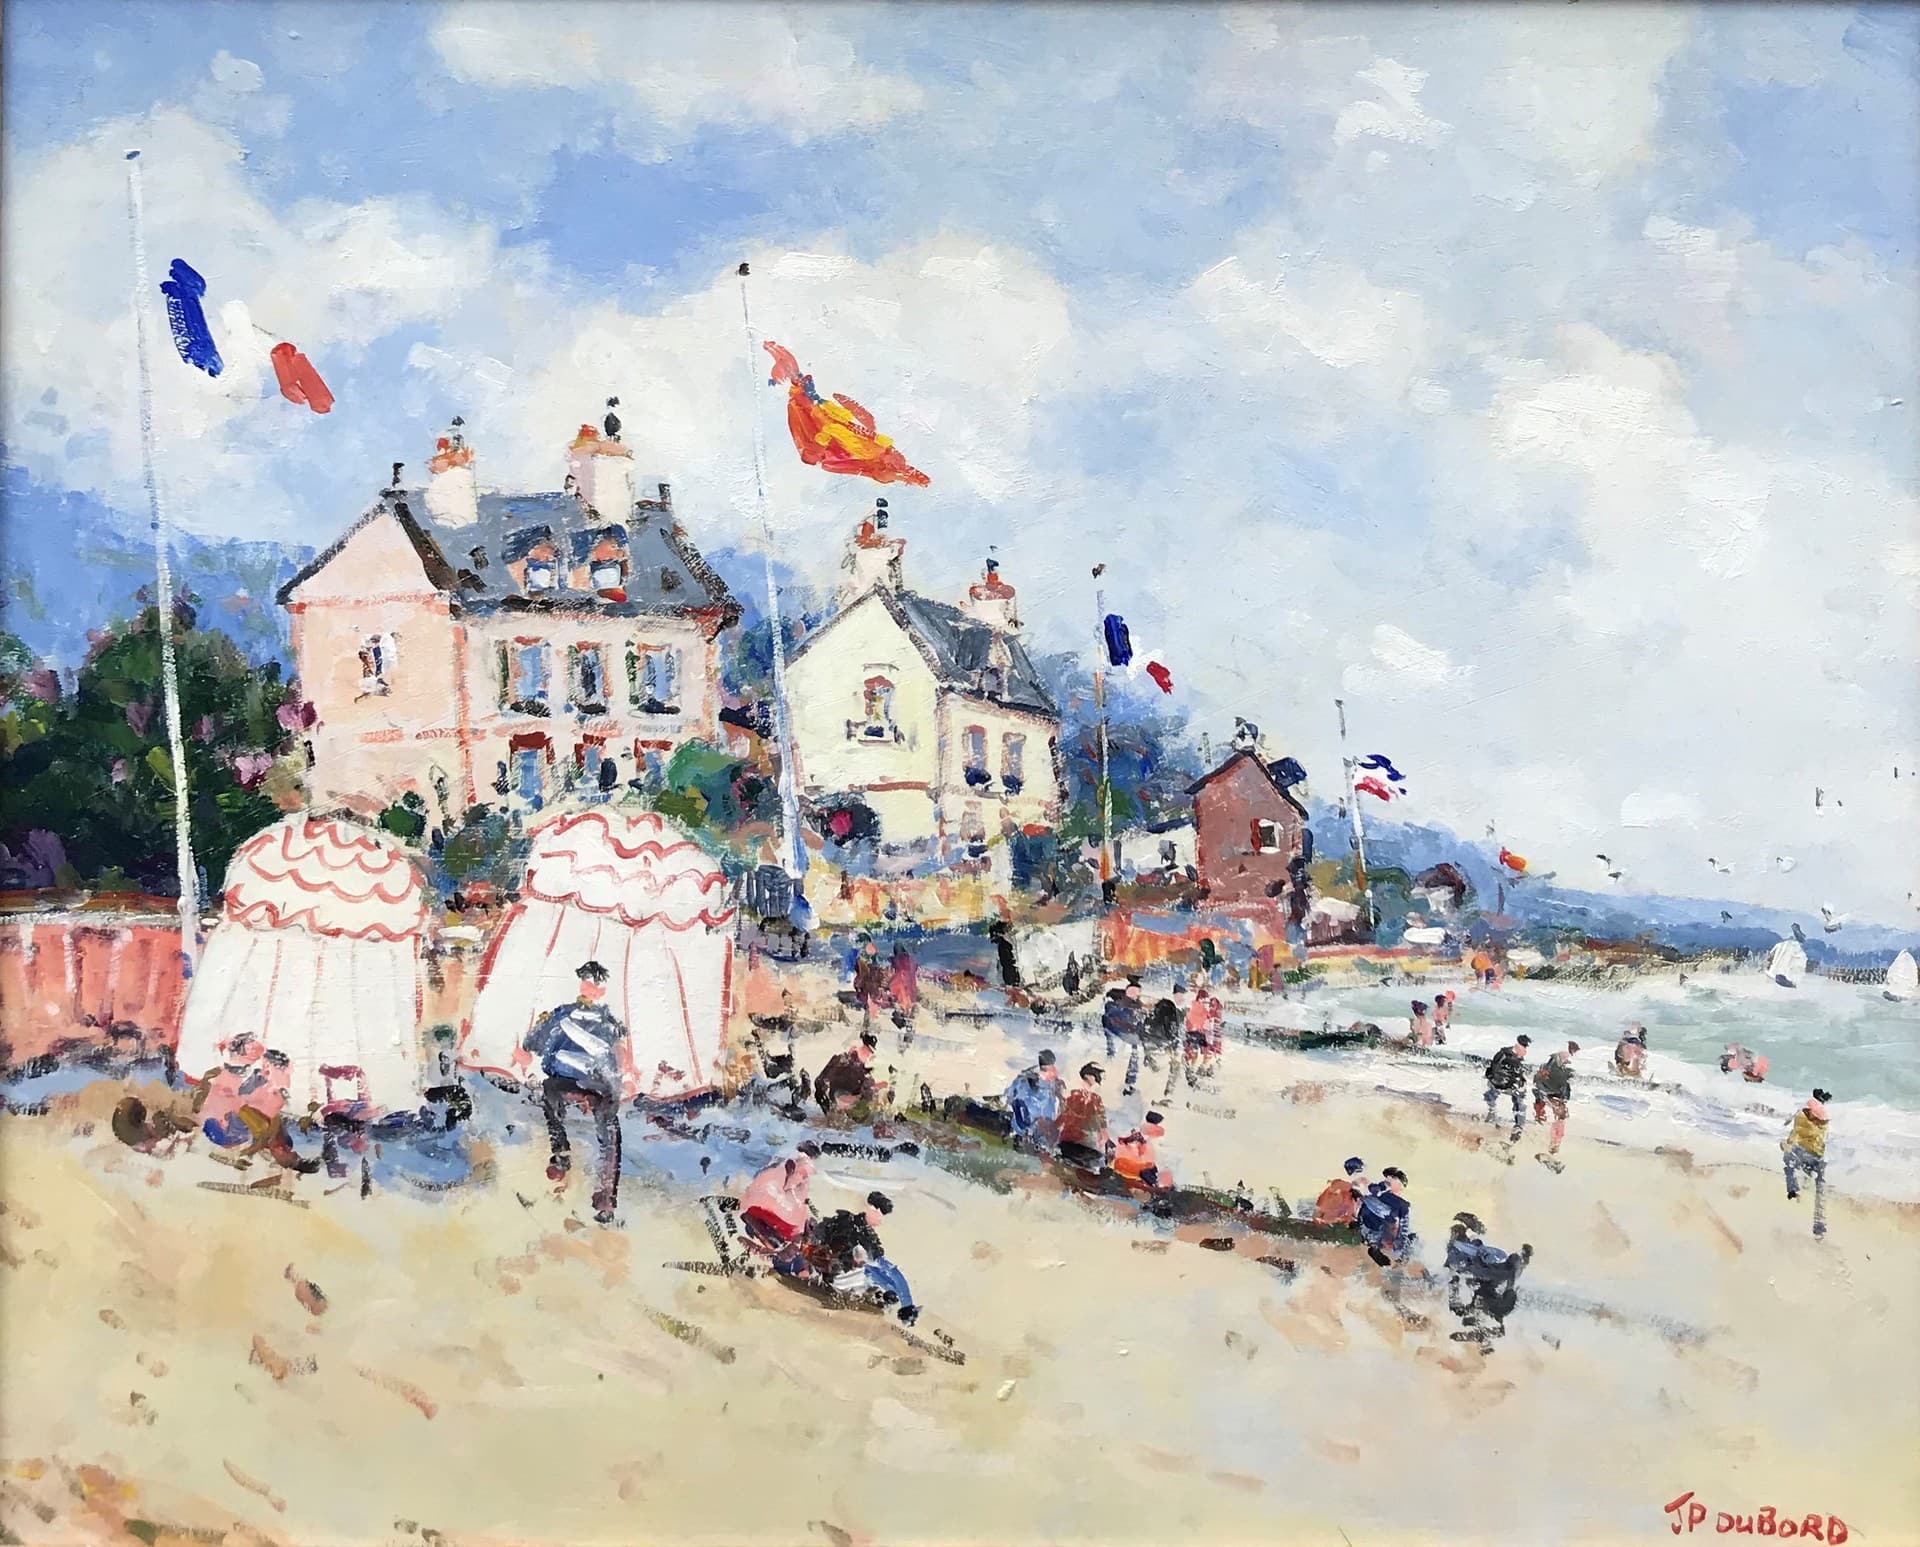 DuBord's Beaches of Normandy. A pleasant, modern beach scene - crowded with visitors, small shops, and flags. The foremost being the flag of France.